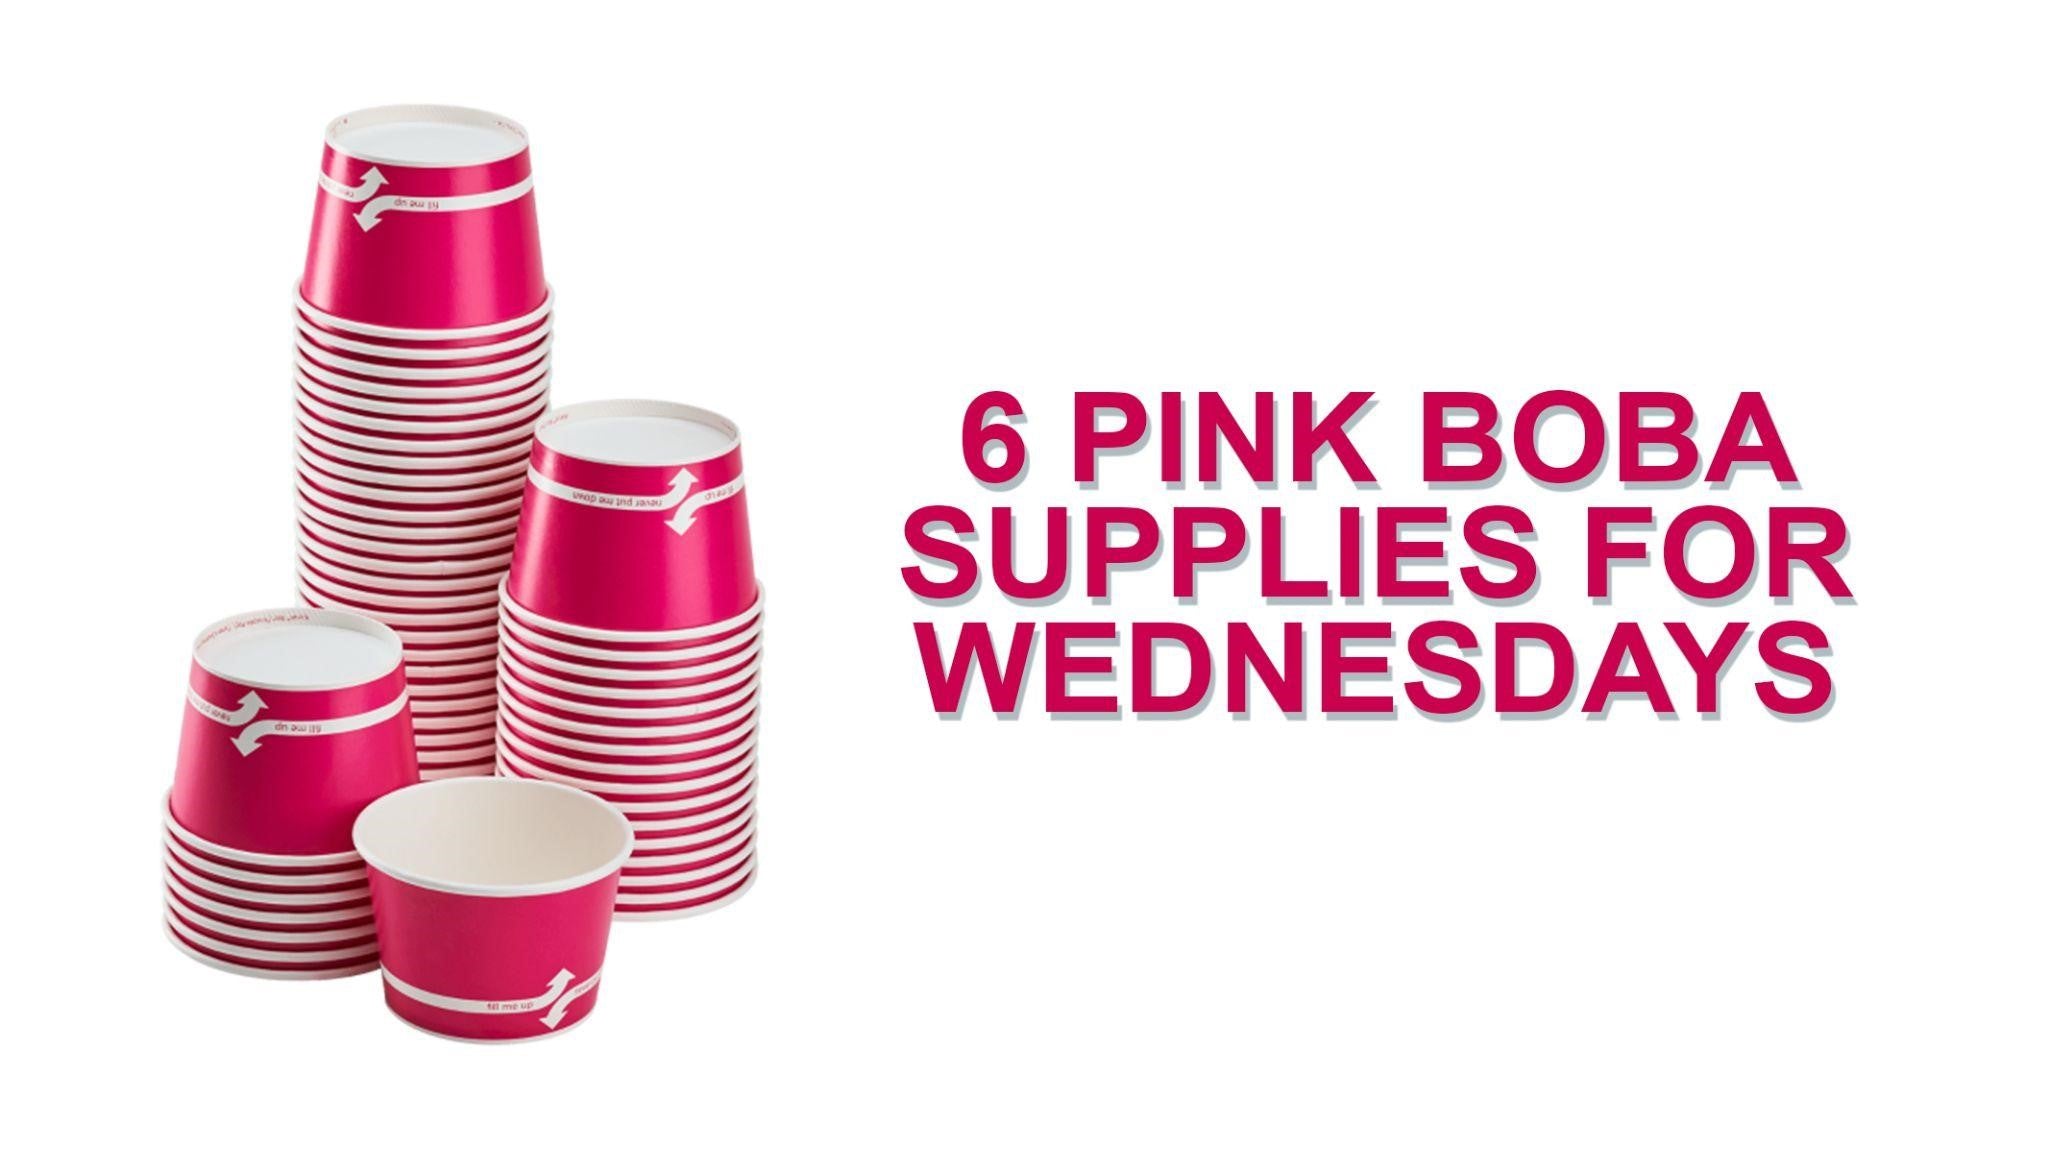 6 Pink Boba Supplies for Wednesdays